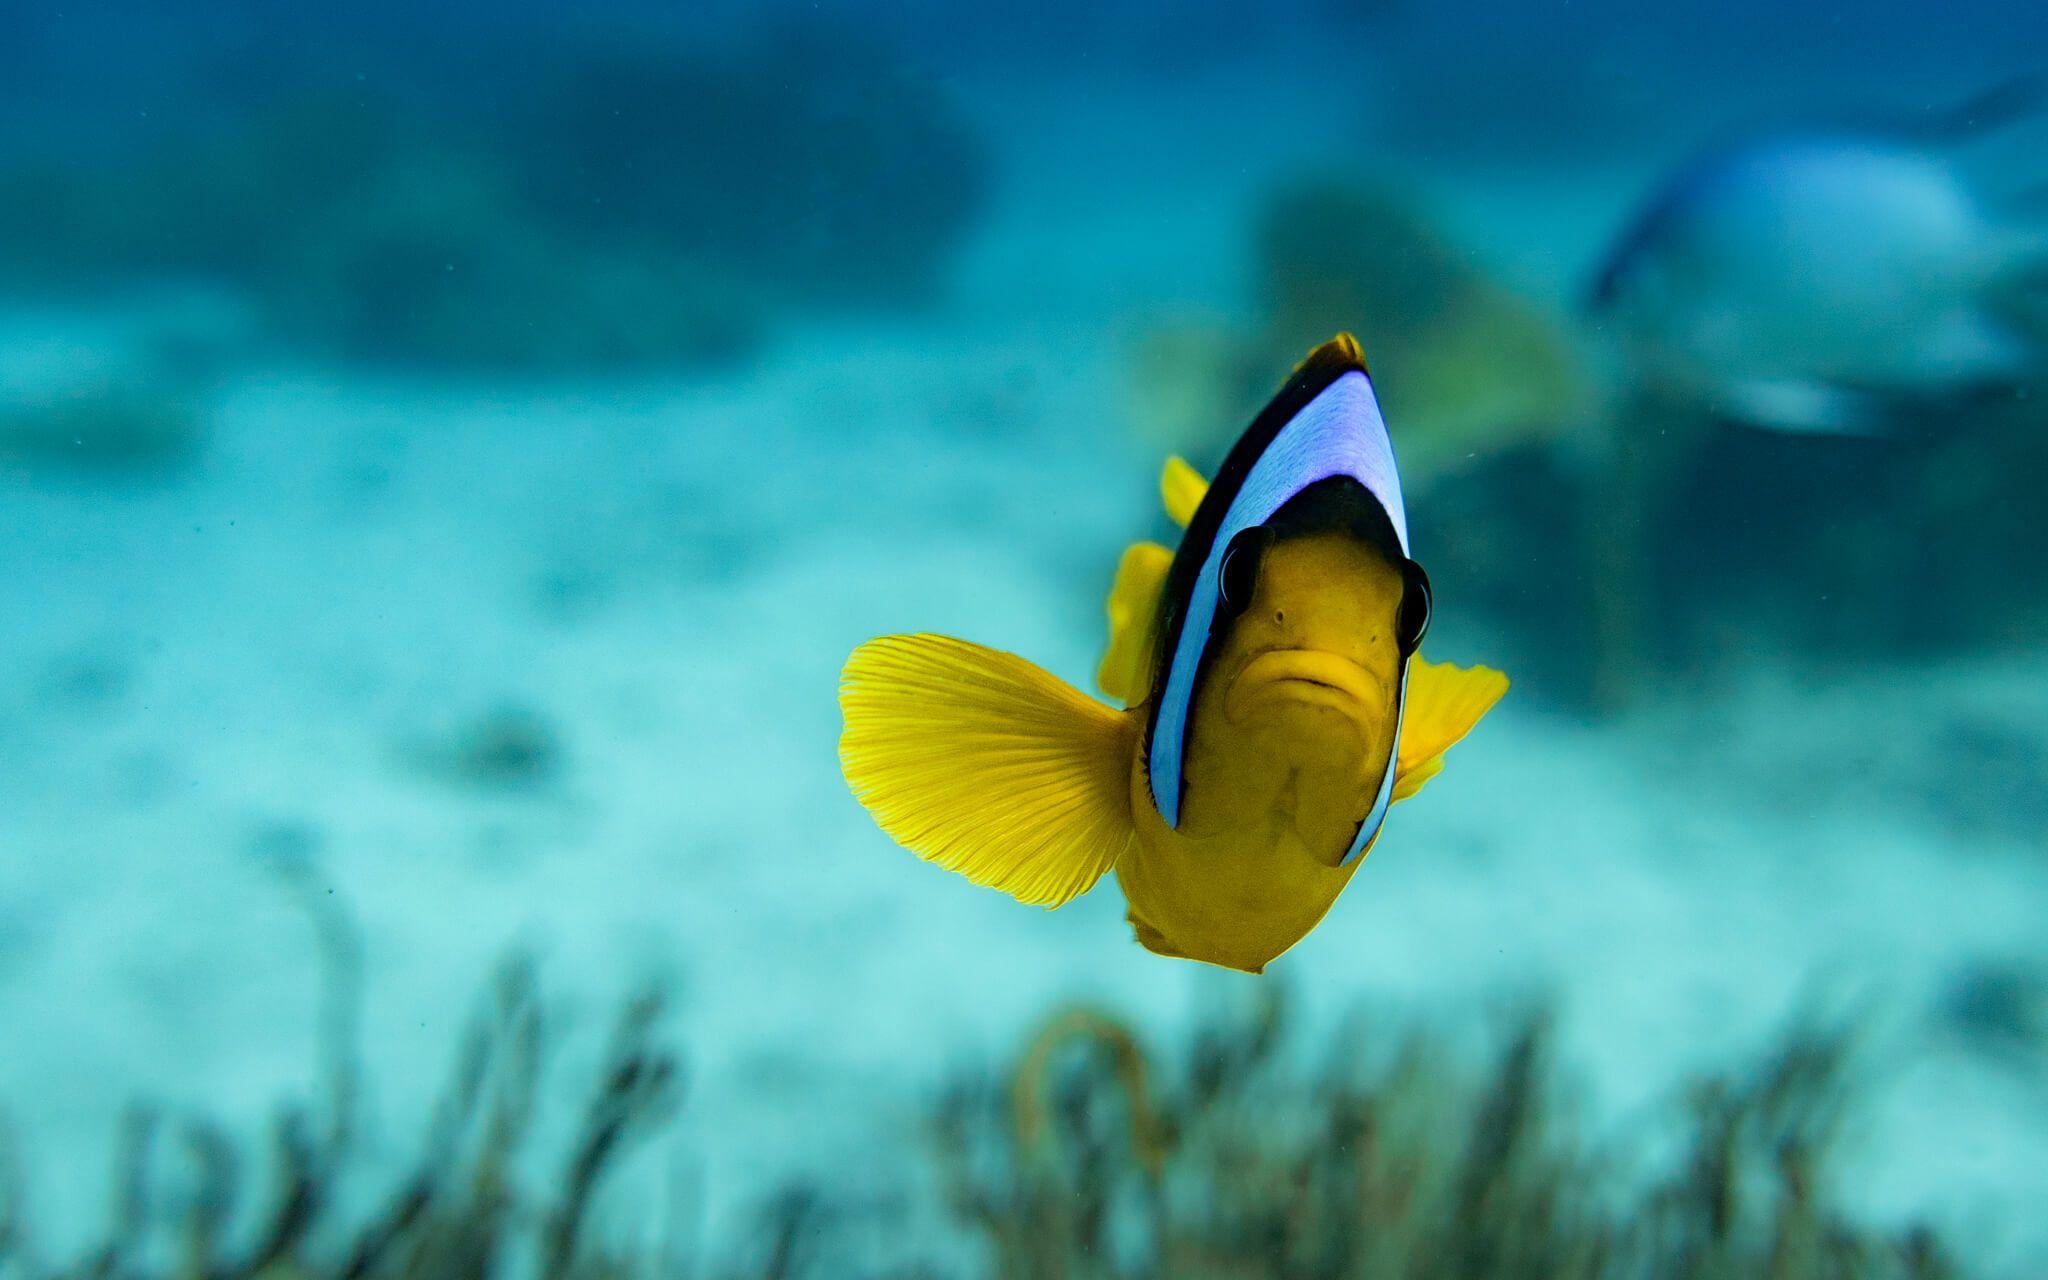 A Clark’s Anemonefish peers into the lens of a photographer in the Red Sea.
Photo: Omar Dessouky